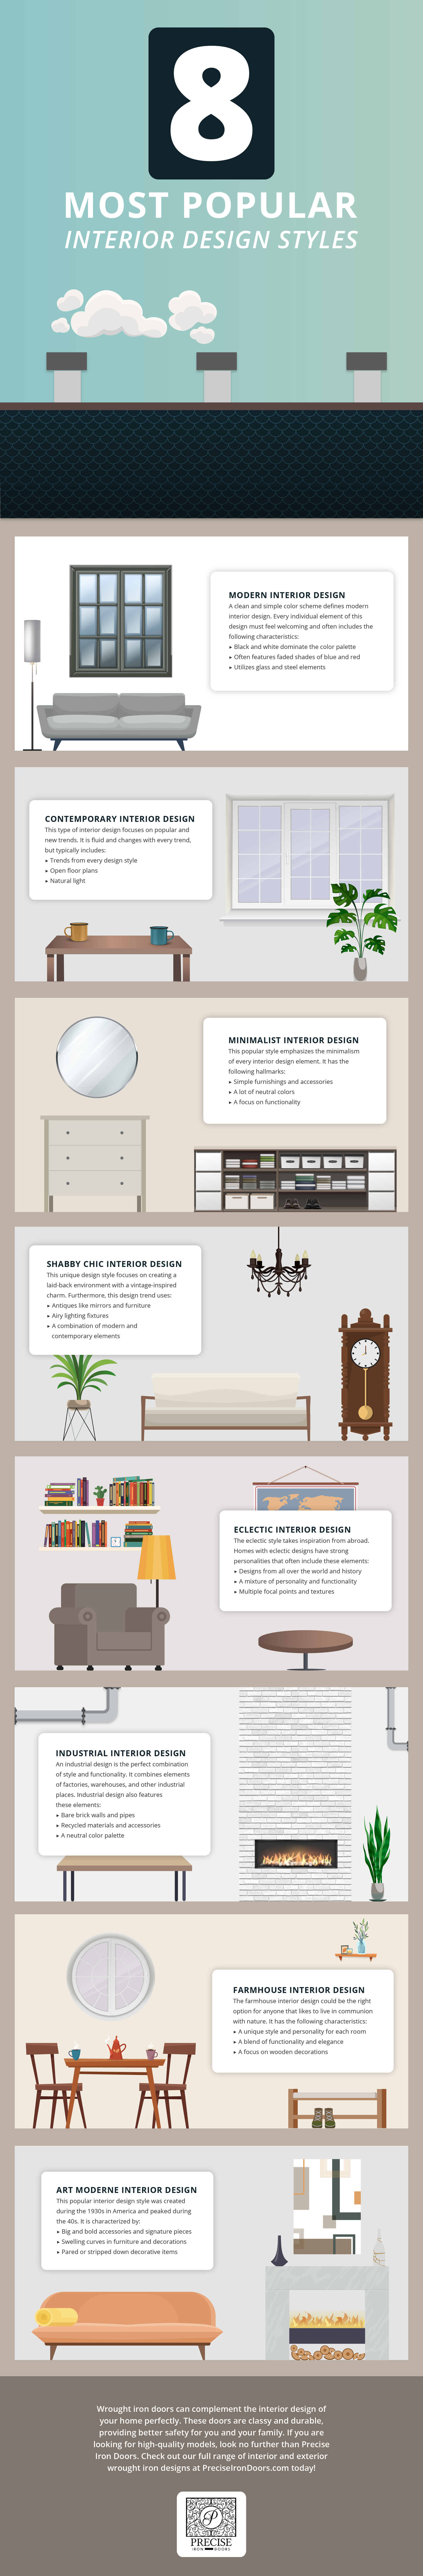 The Most Popular Interior Design Styles Infographic